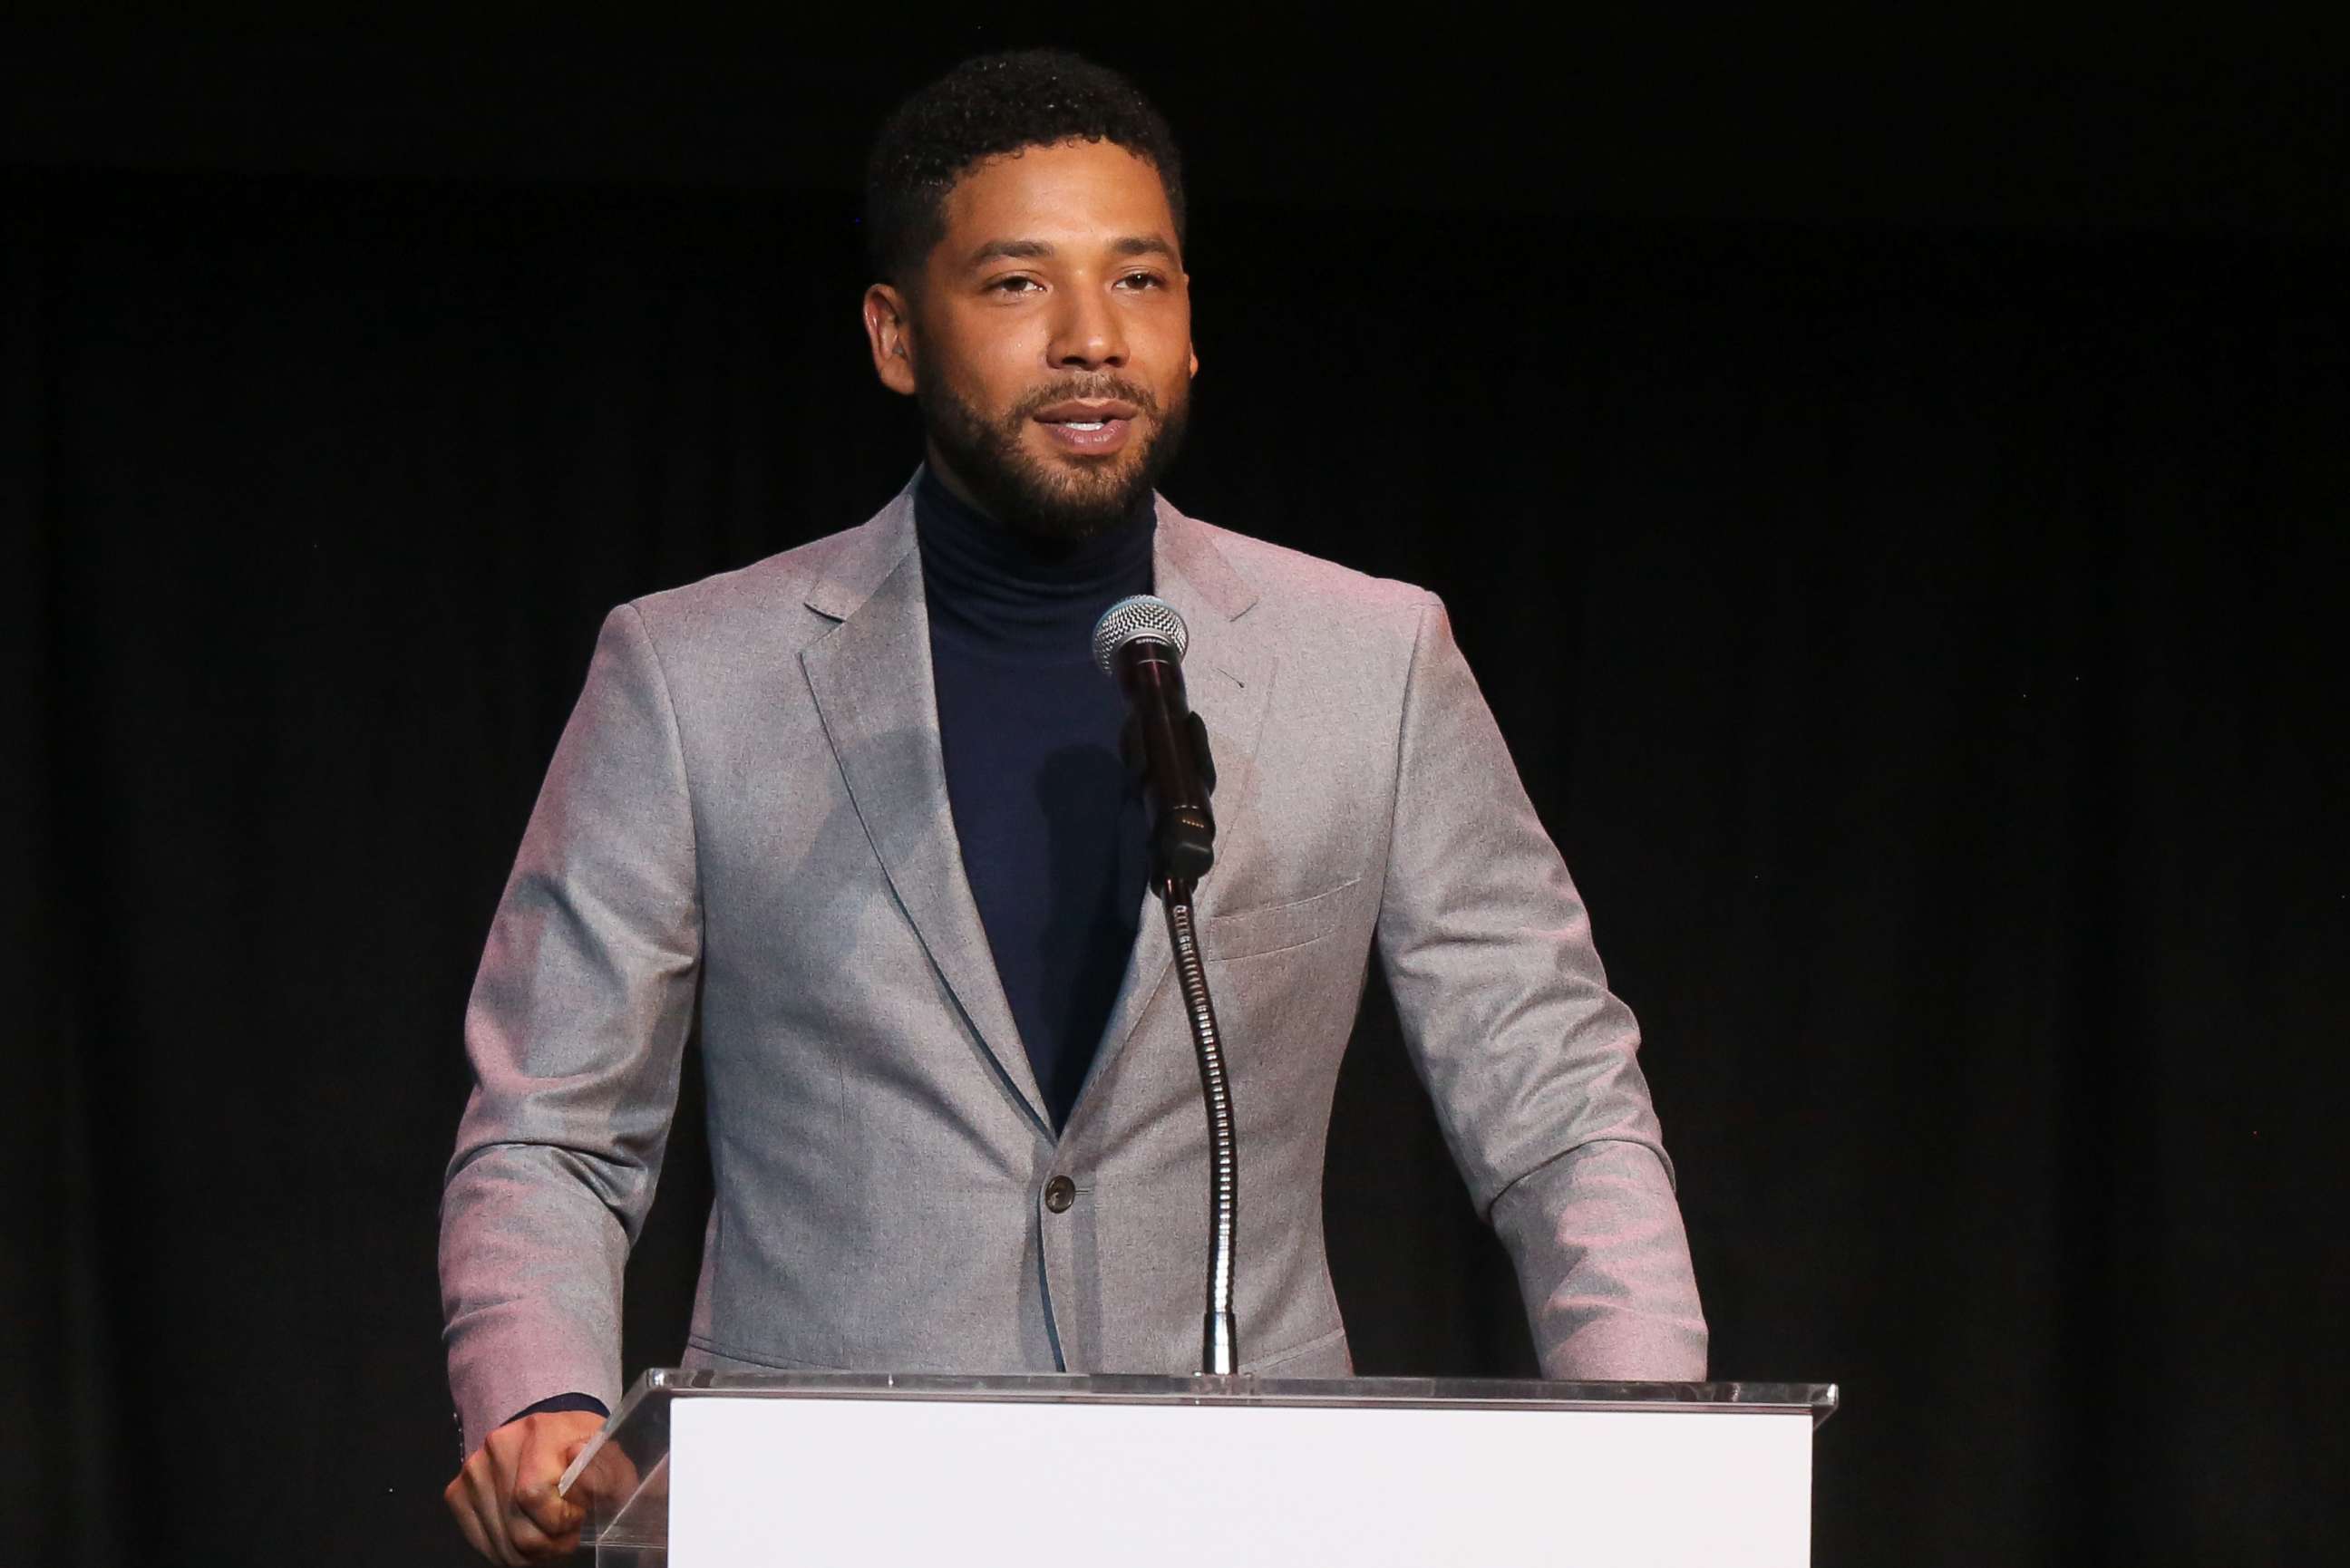 PHOTO: Jussie Smollett speaks at the Children's Defense Fund California's 28th Annual Beat The Odds Awards on Dec. 6, 2018 in Los Angeles.